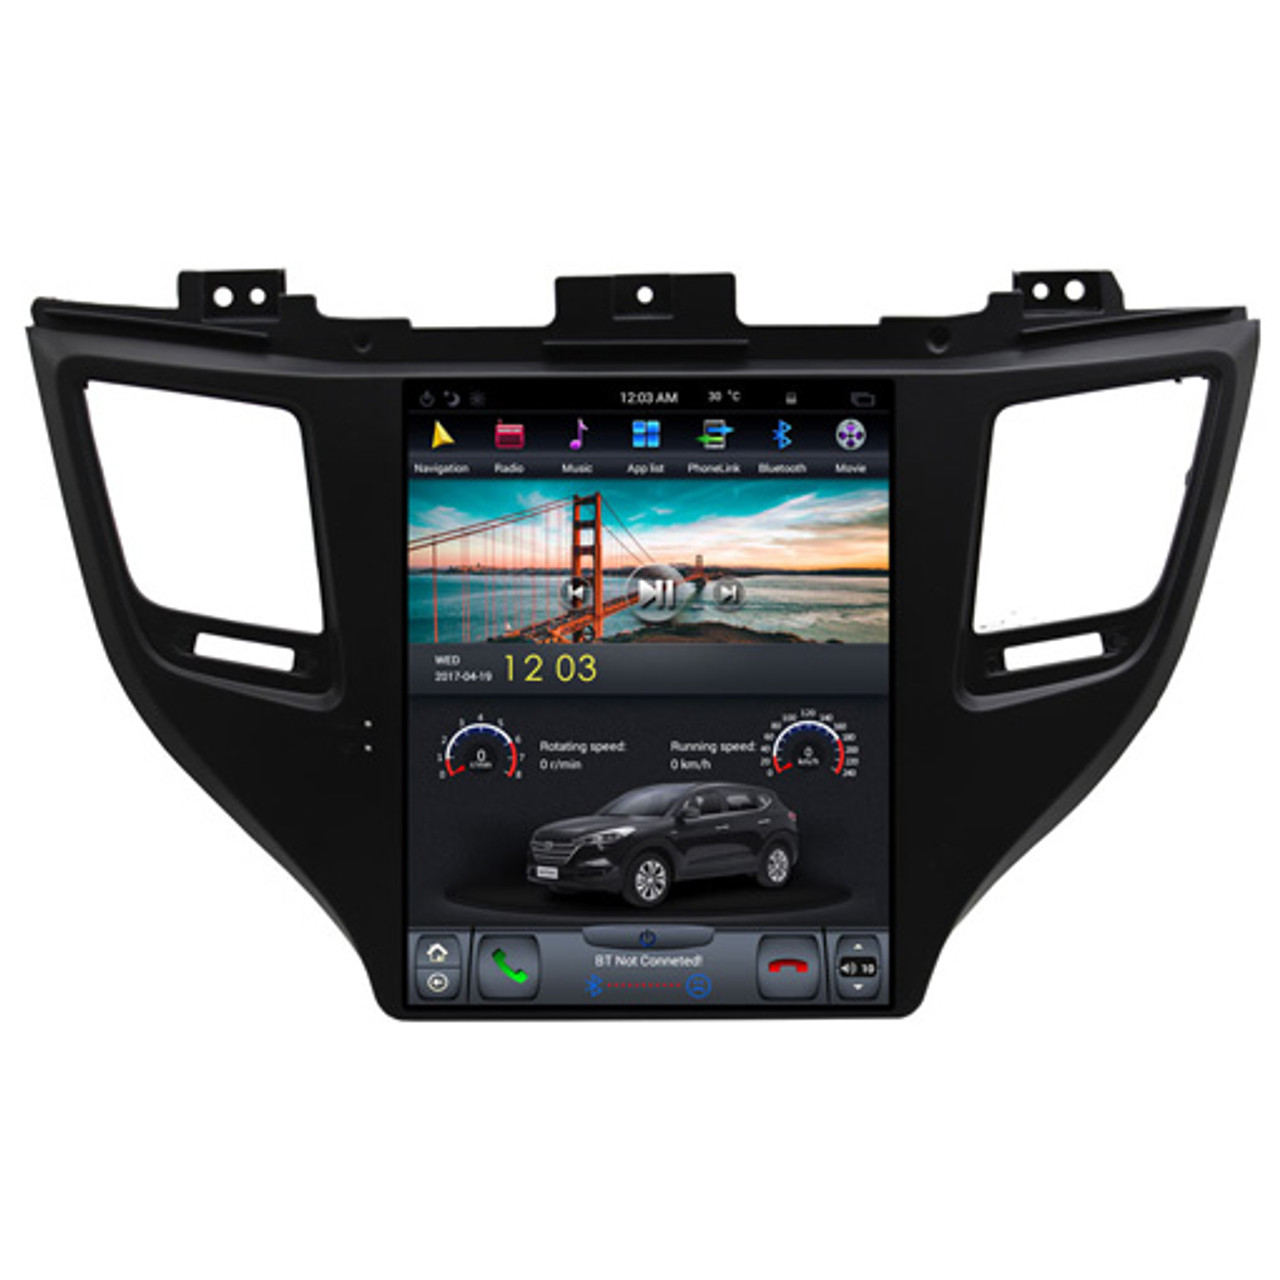 Stereo peugeot 207 autoradio gps Sets for All Types of Models 